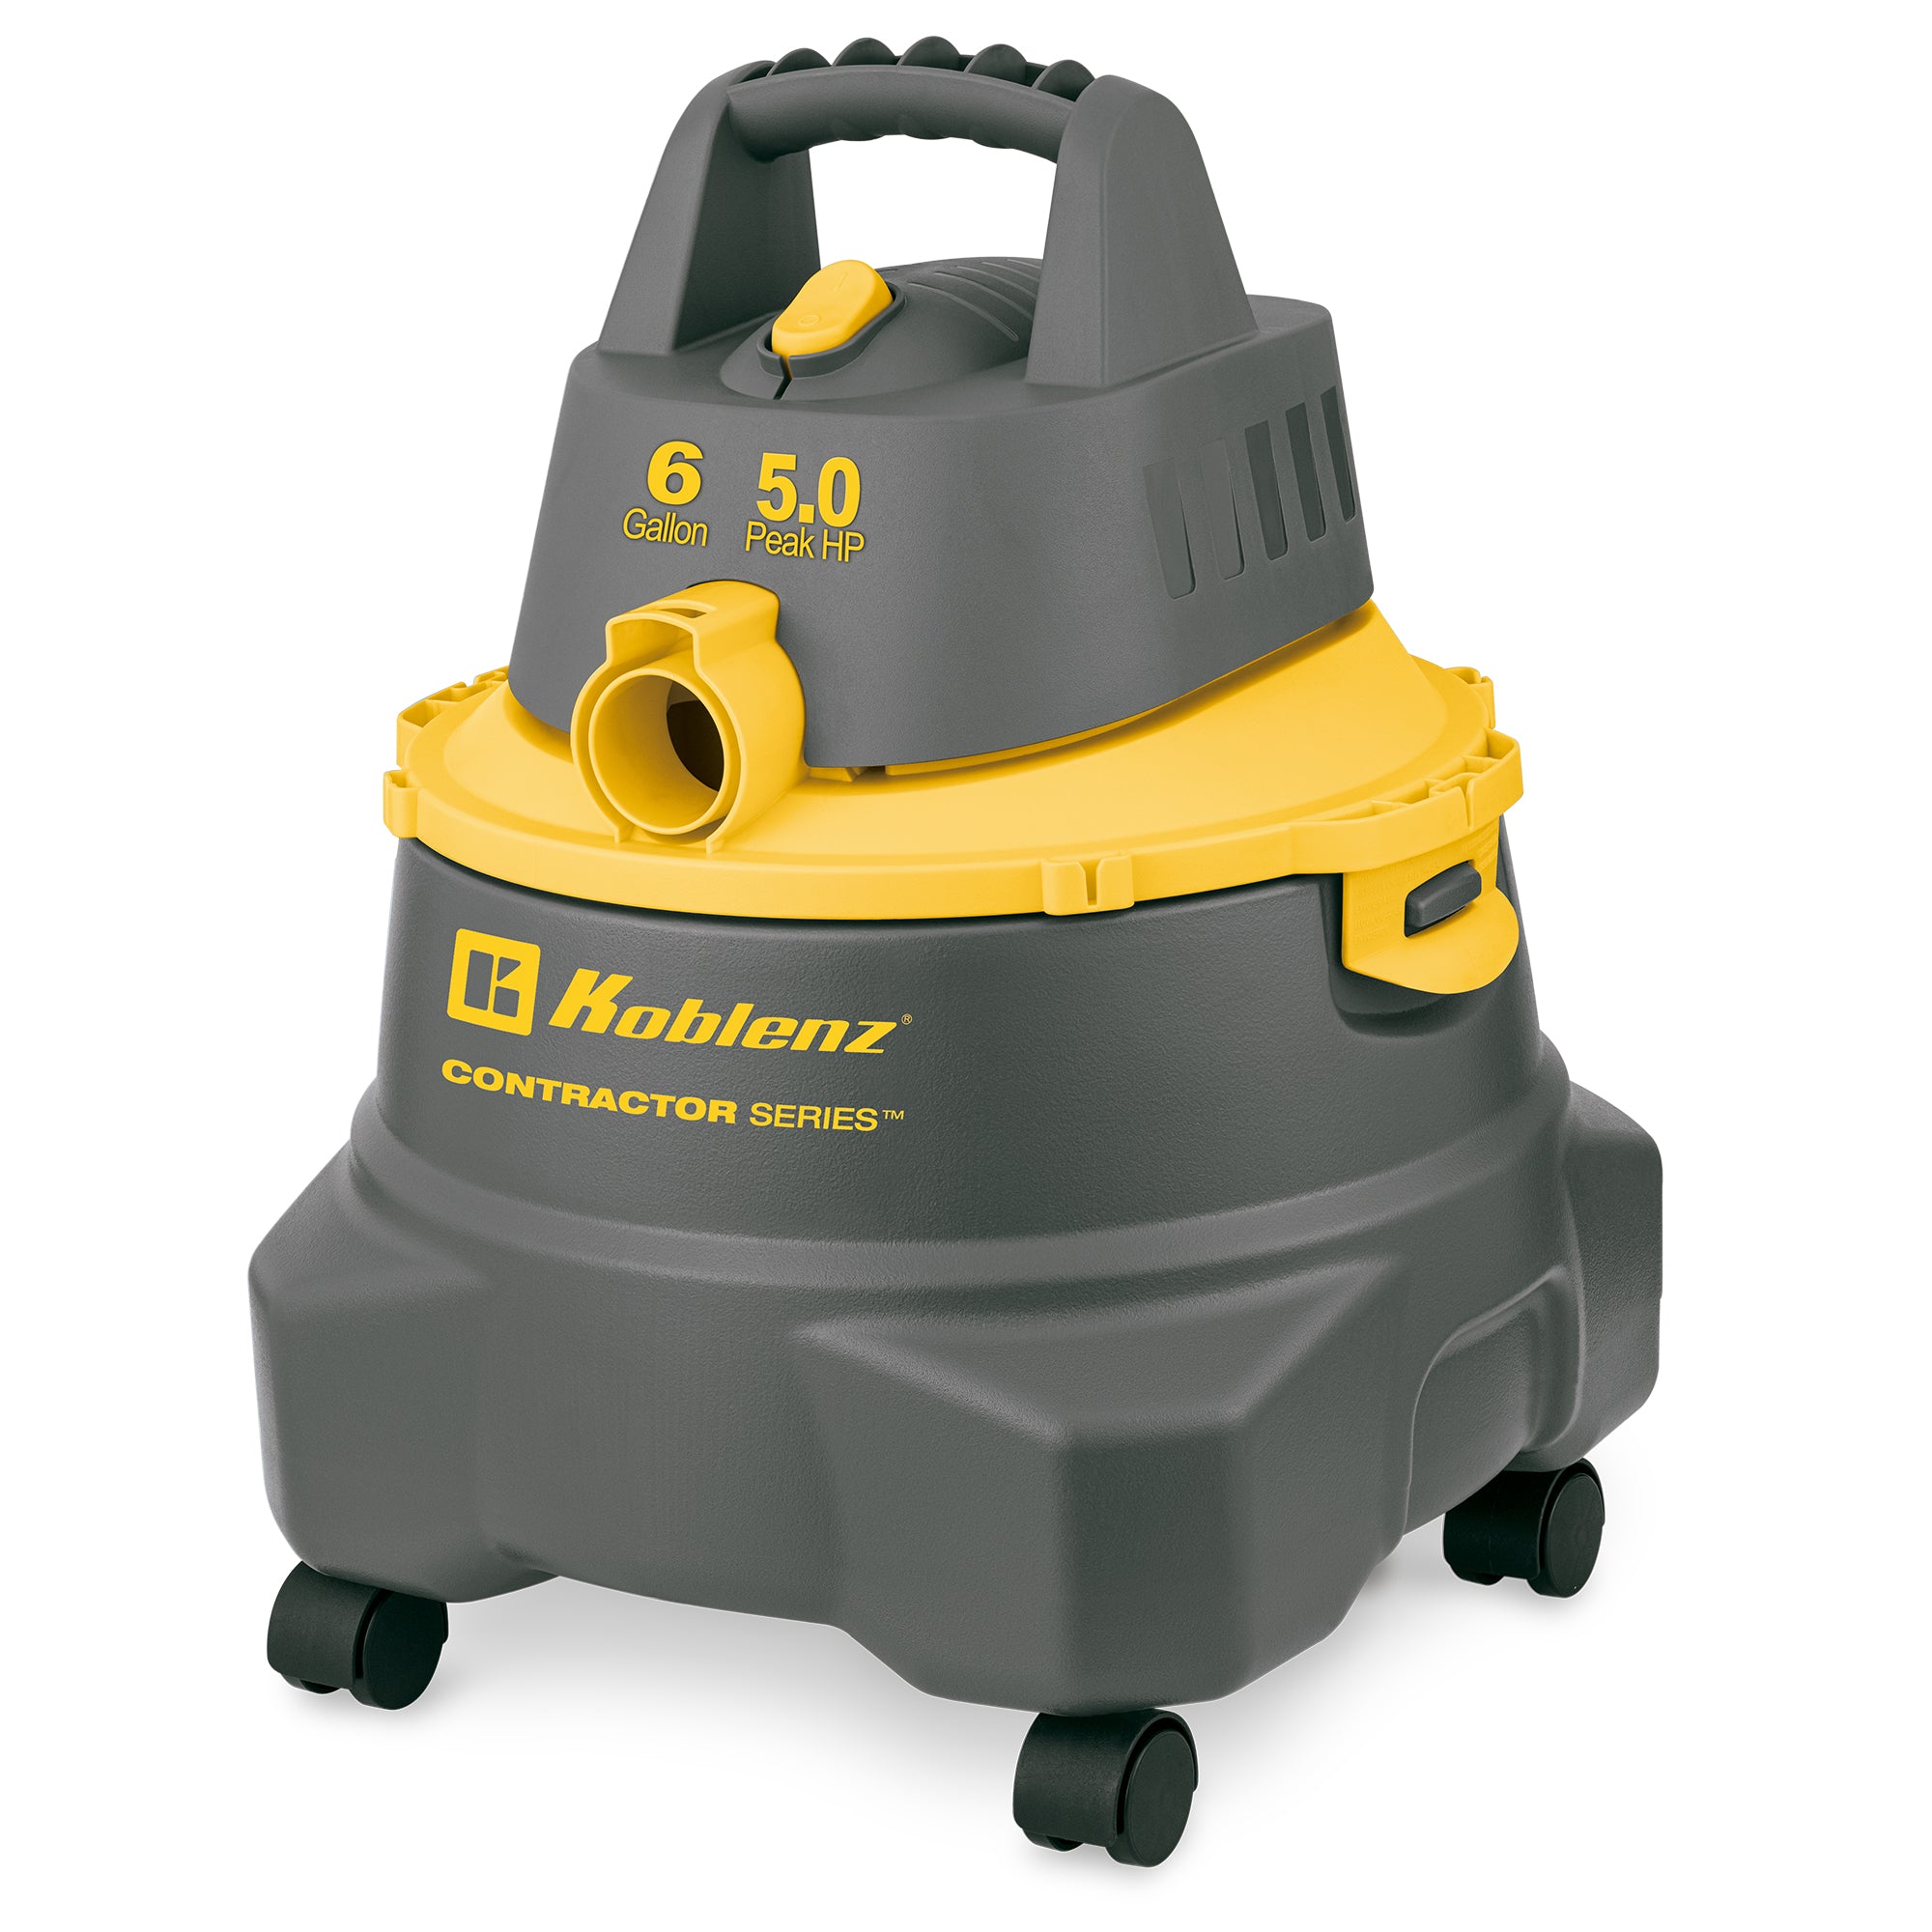 6 to 9 Gallon Contractor Vacuums